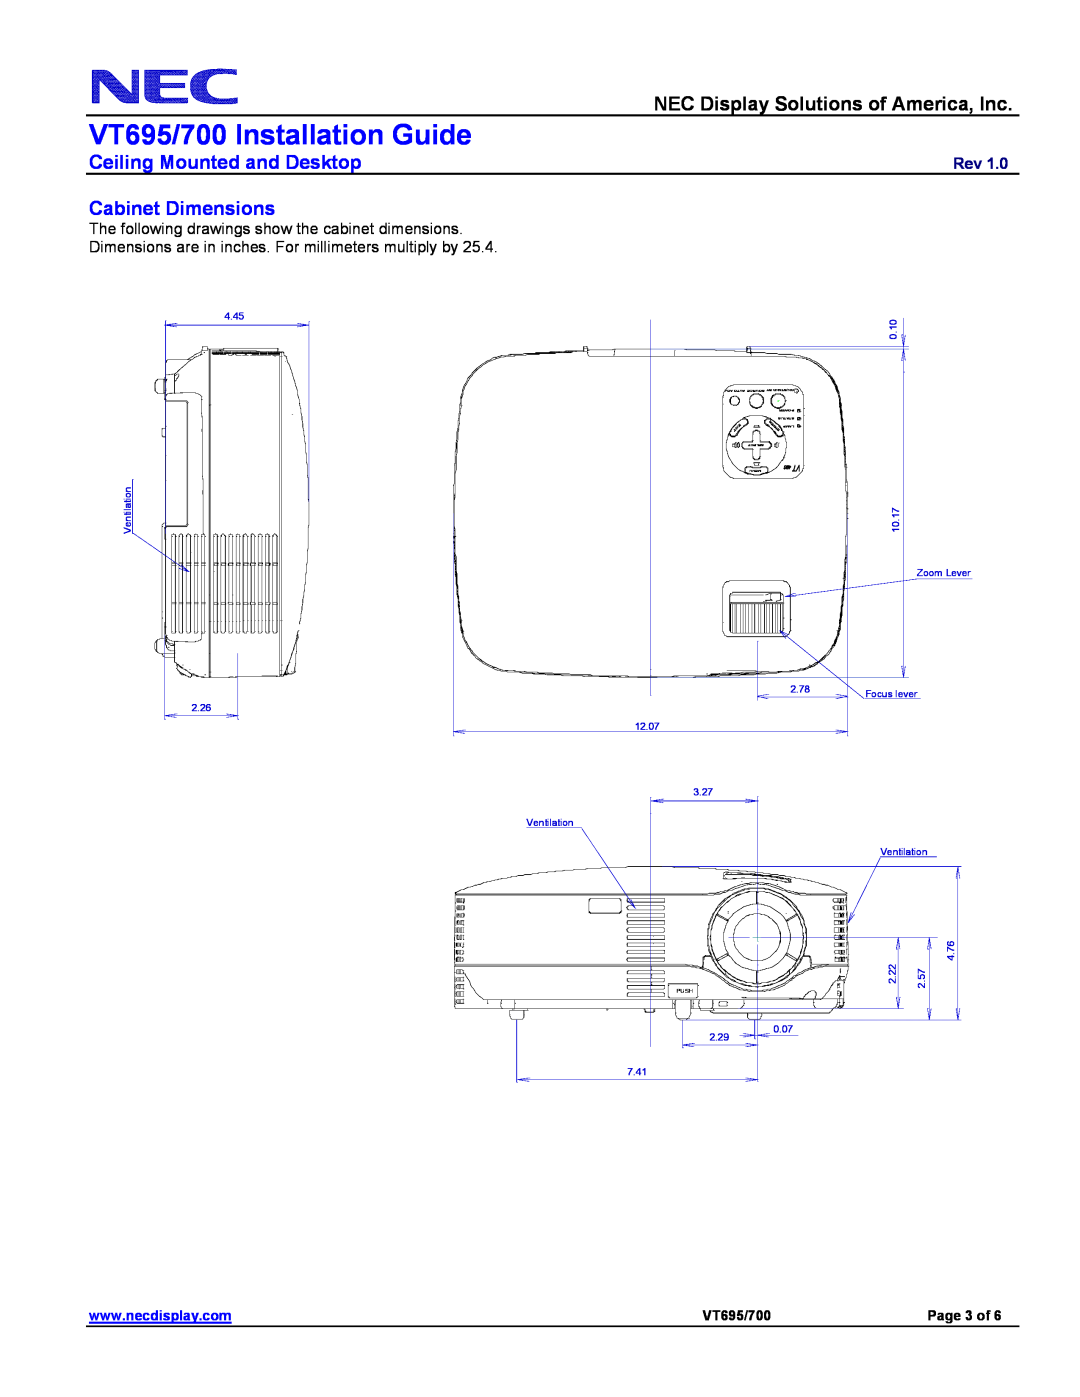 NEC Cabinet Dimensions, VT695/700 Installation Guide, NEC Display Solutions of America, Inc, Page 3 of, Ventilation 